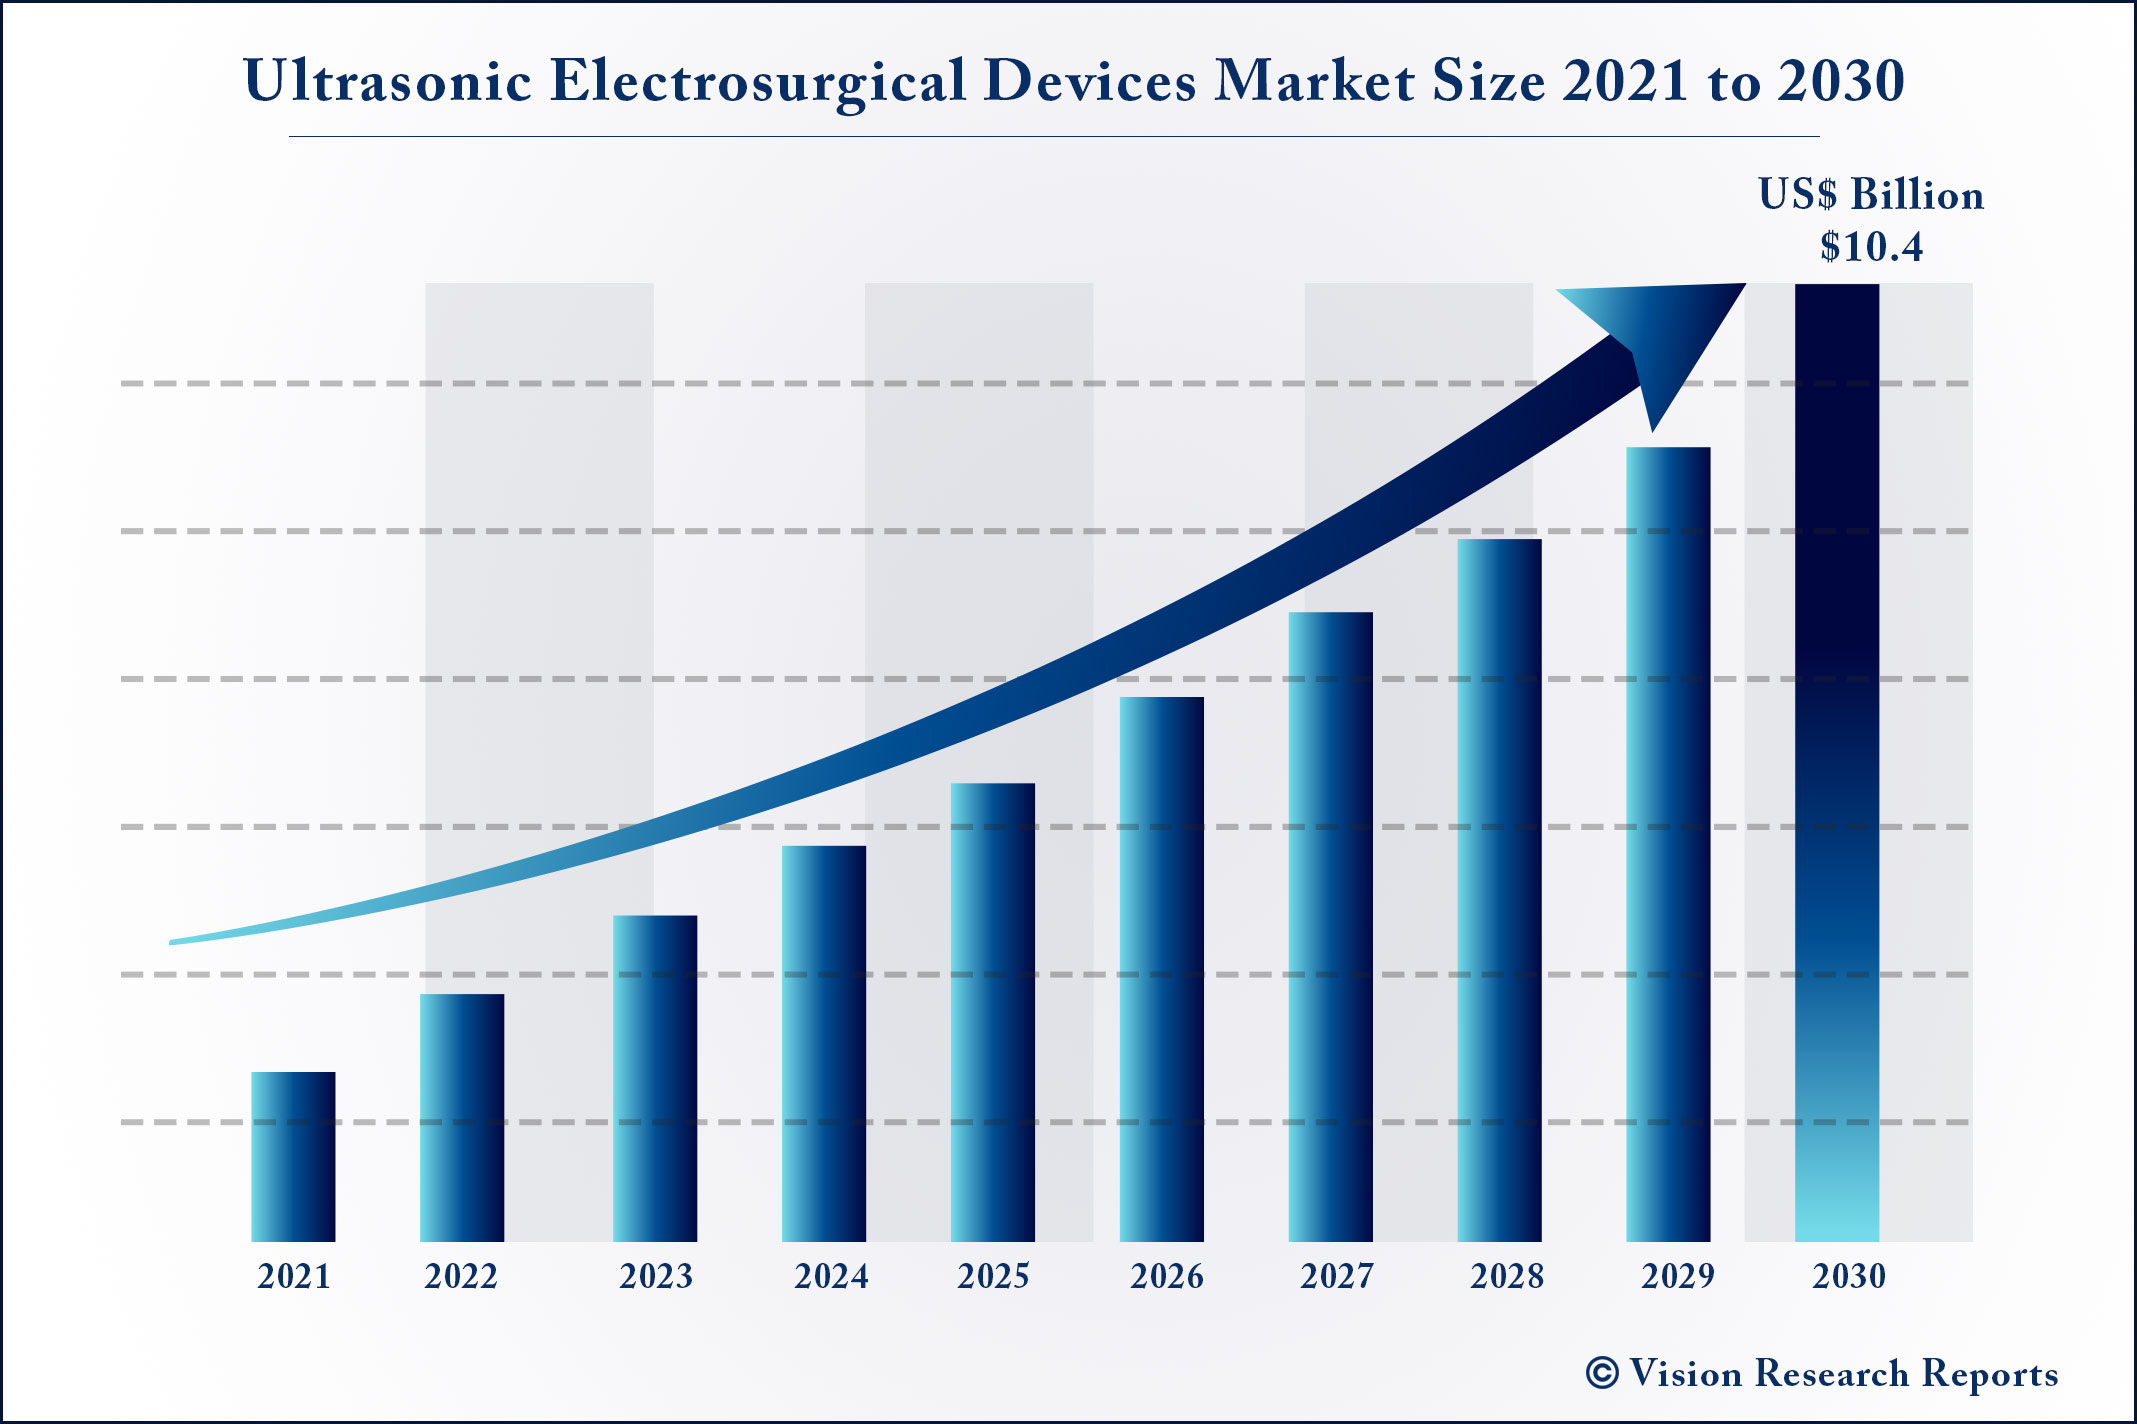 Ultrasonic Electrosurgical Devices Market Size 2021 to 2030